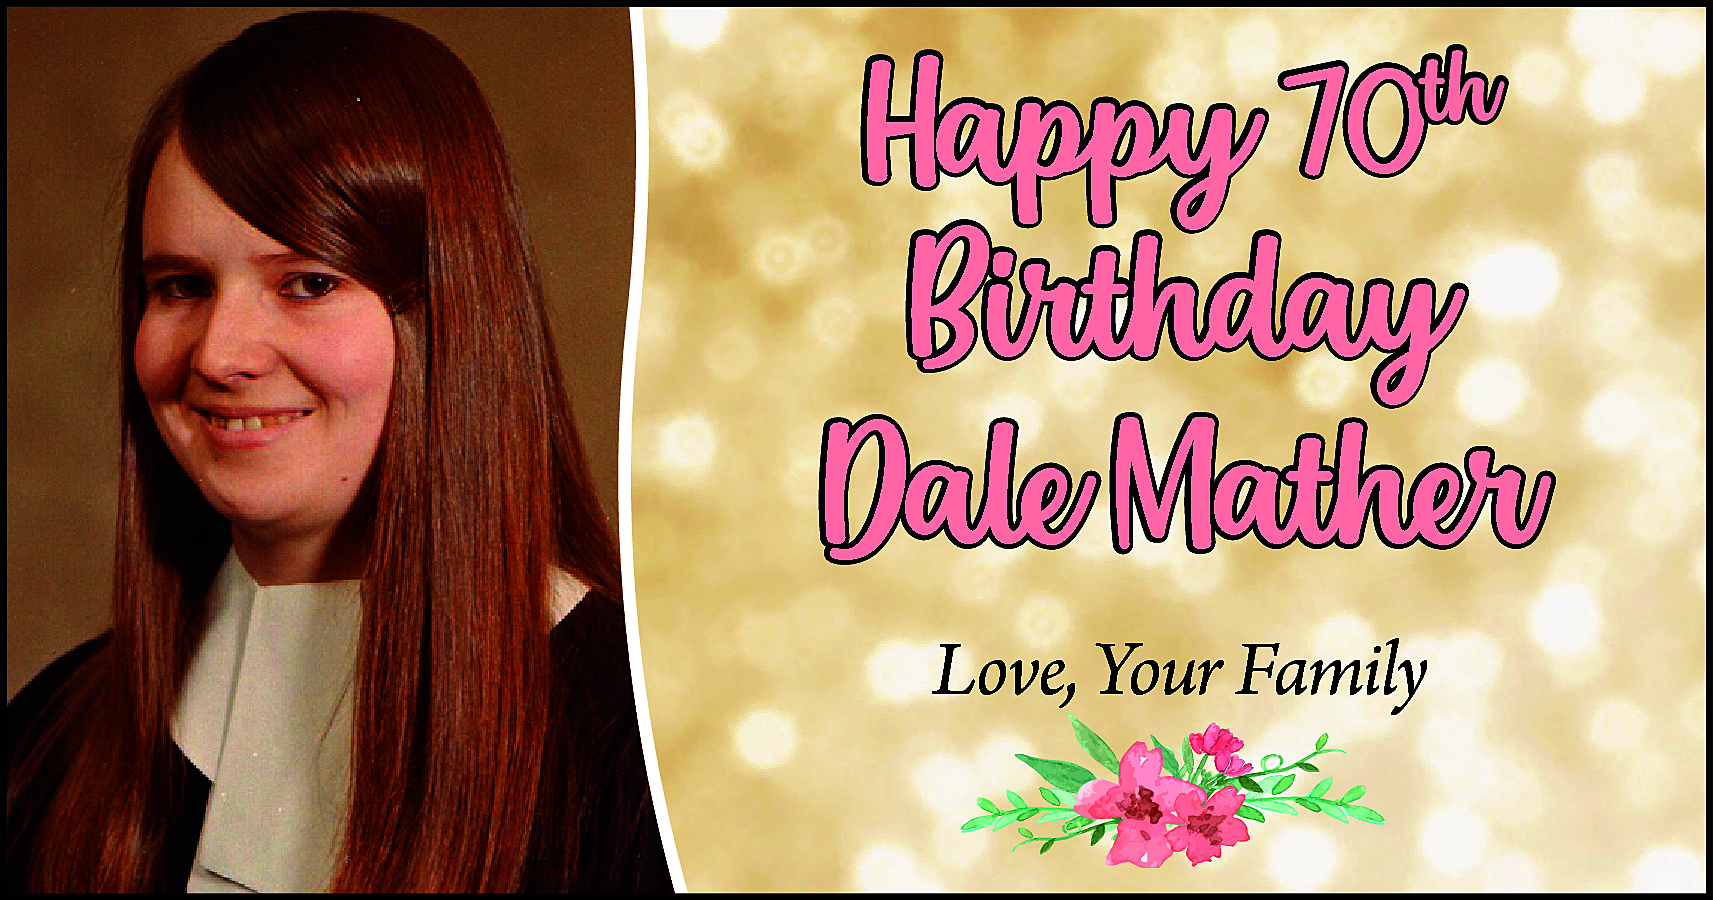 Happy 70th <br>Birthday <br>Dale Mather  Happy 70th  Birthday  Dale Mather  Love, Your Family    